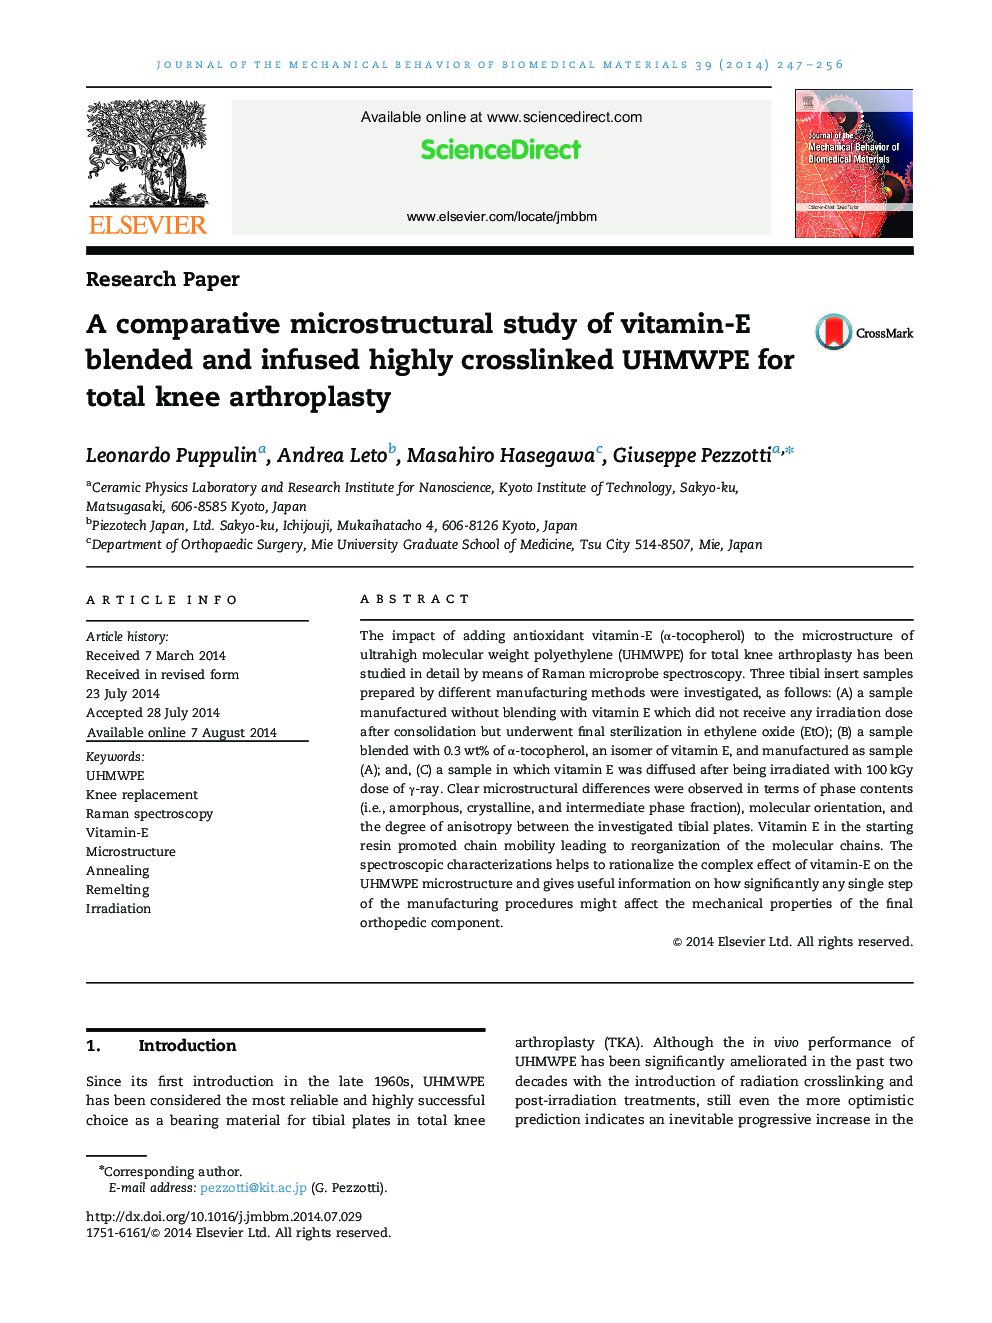 A comparative microstructural study of vitamin-E blended and infused highly crosslinked UHMWPE for total knee arthroplasty